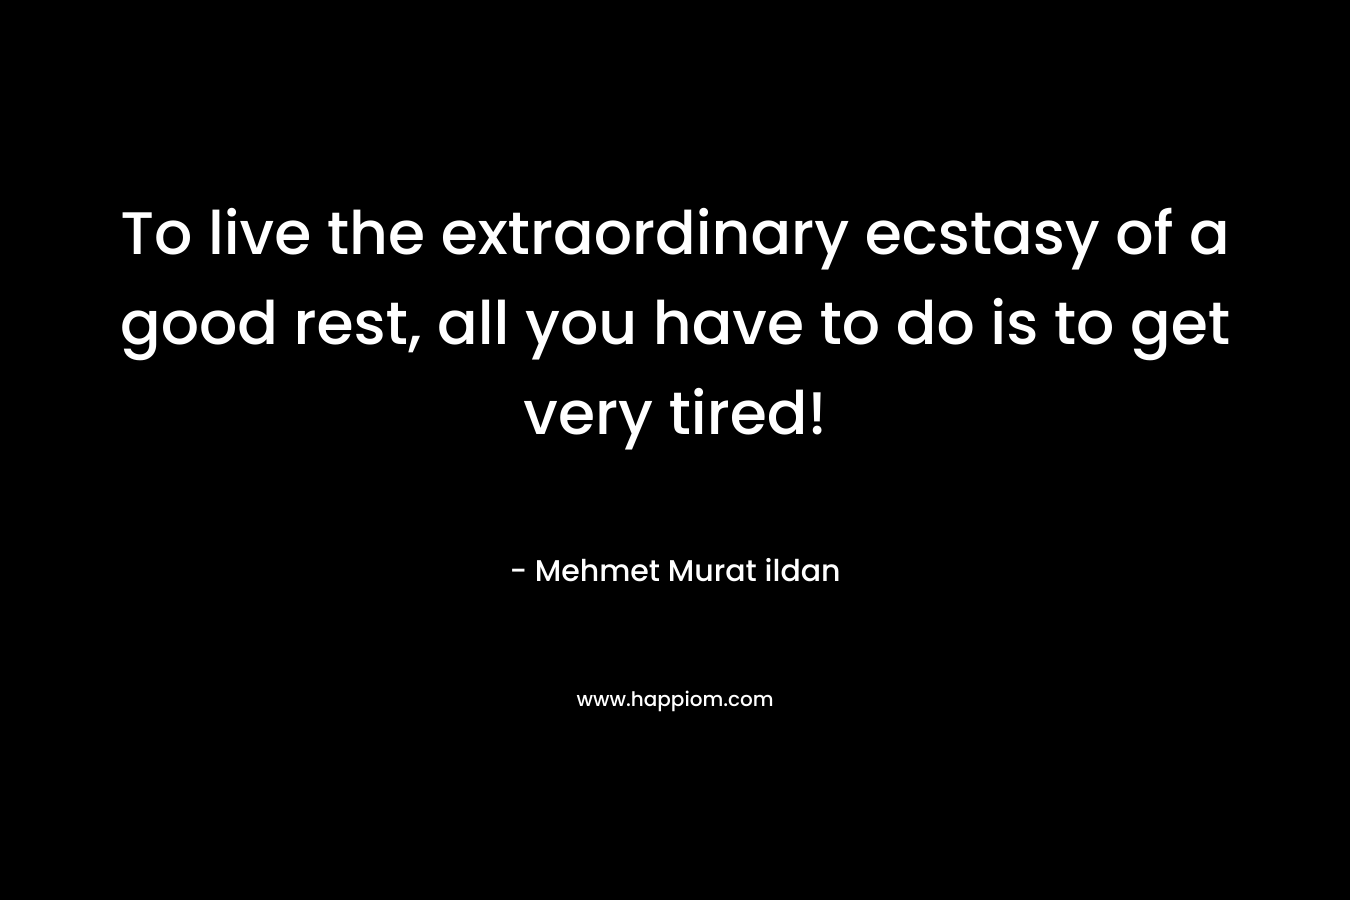 To live the extraordinary ecstasy of a good rest, all you have to do is to get very tired! – Mehmet Murat ildan